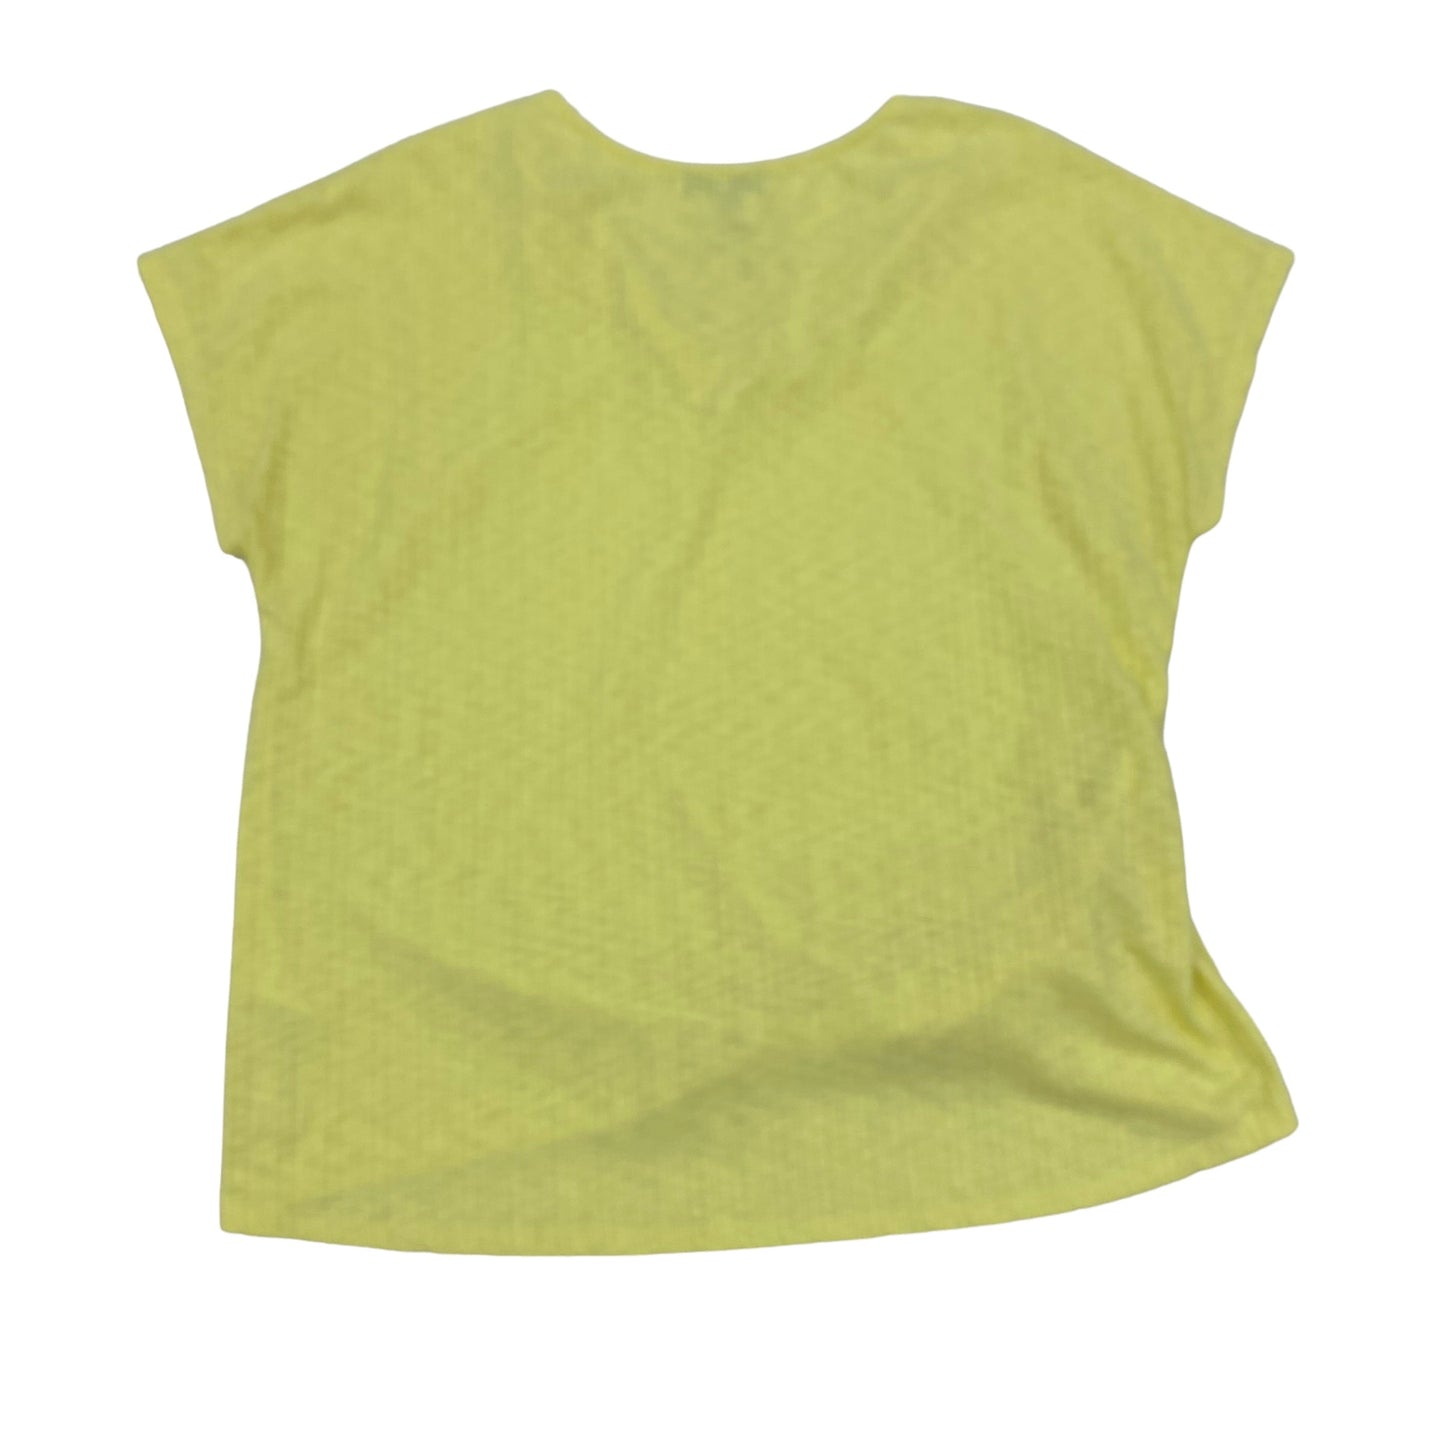 YELLOW DEMOCRACY TOP SS, Size XL